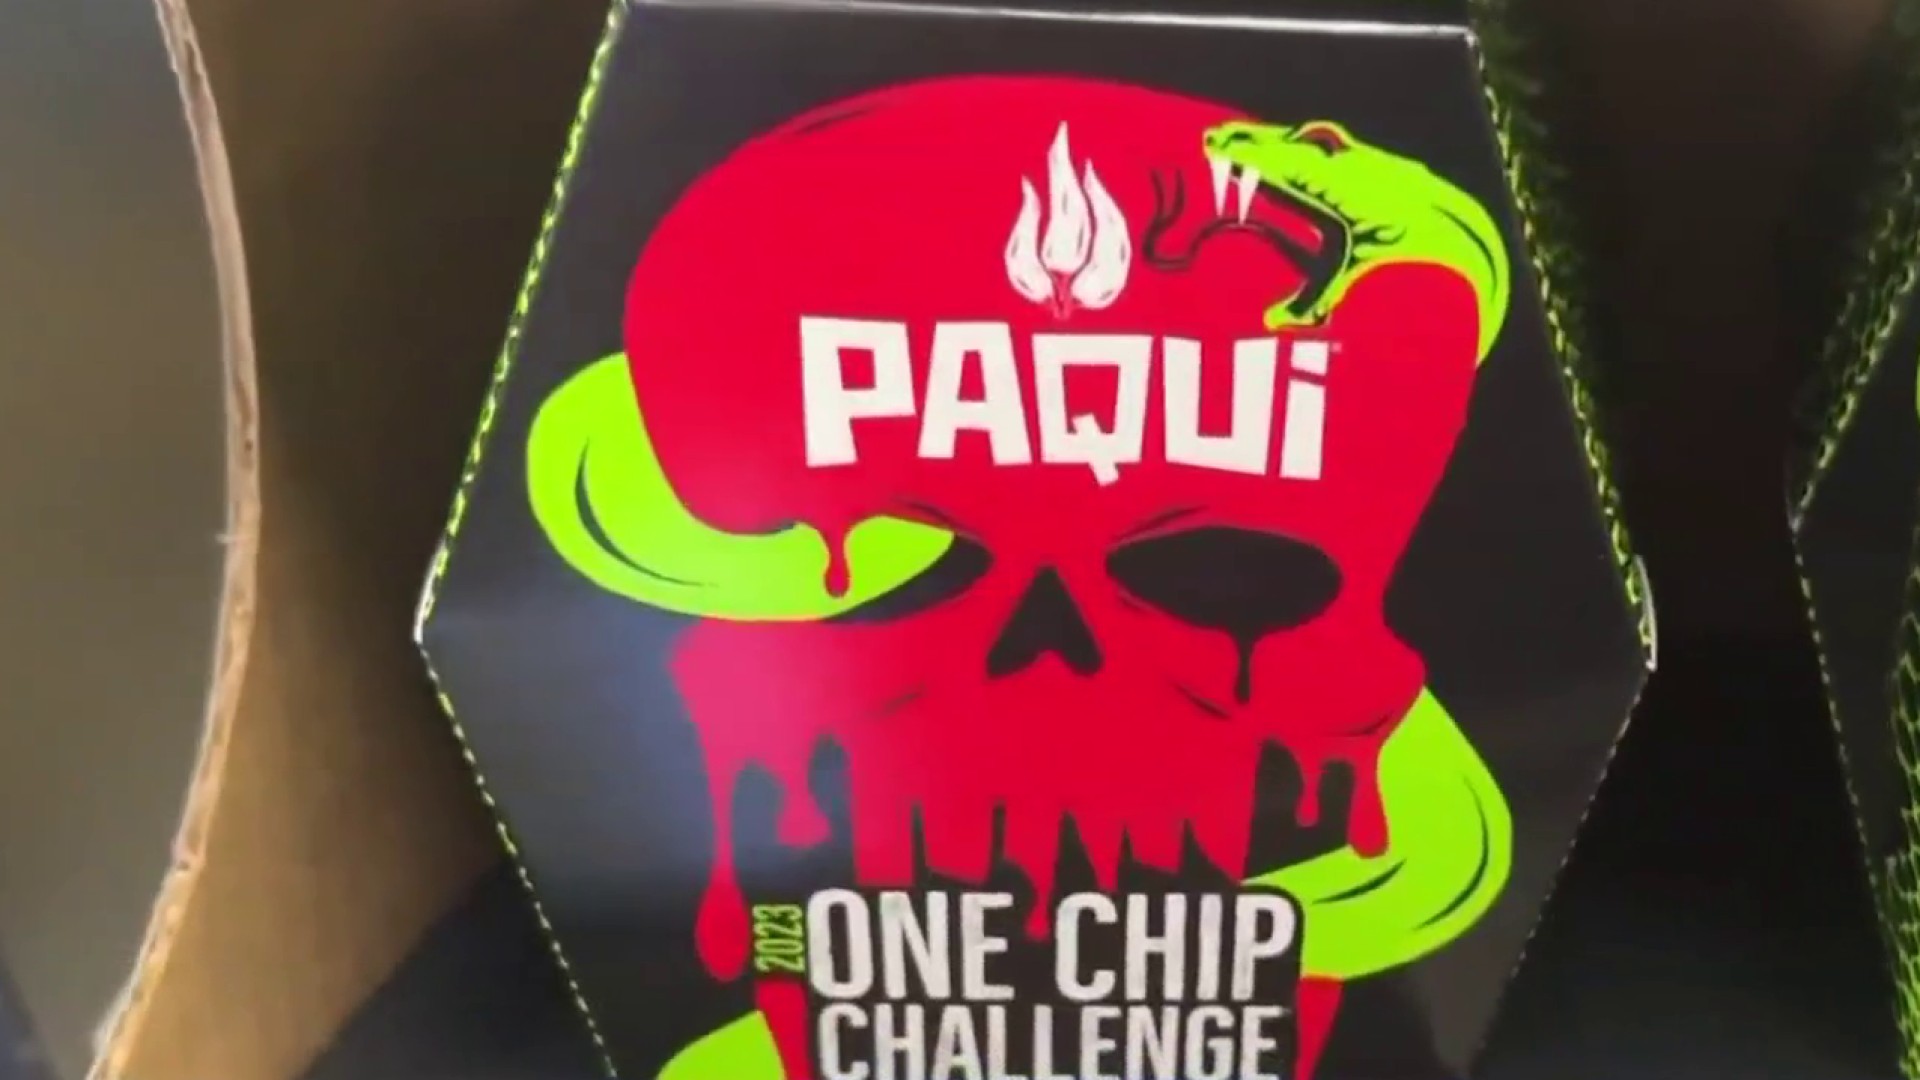 What Parents Need To Know About The 'One Chip Challenge